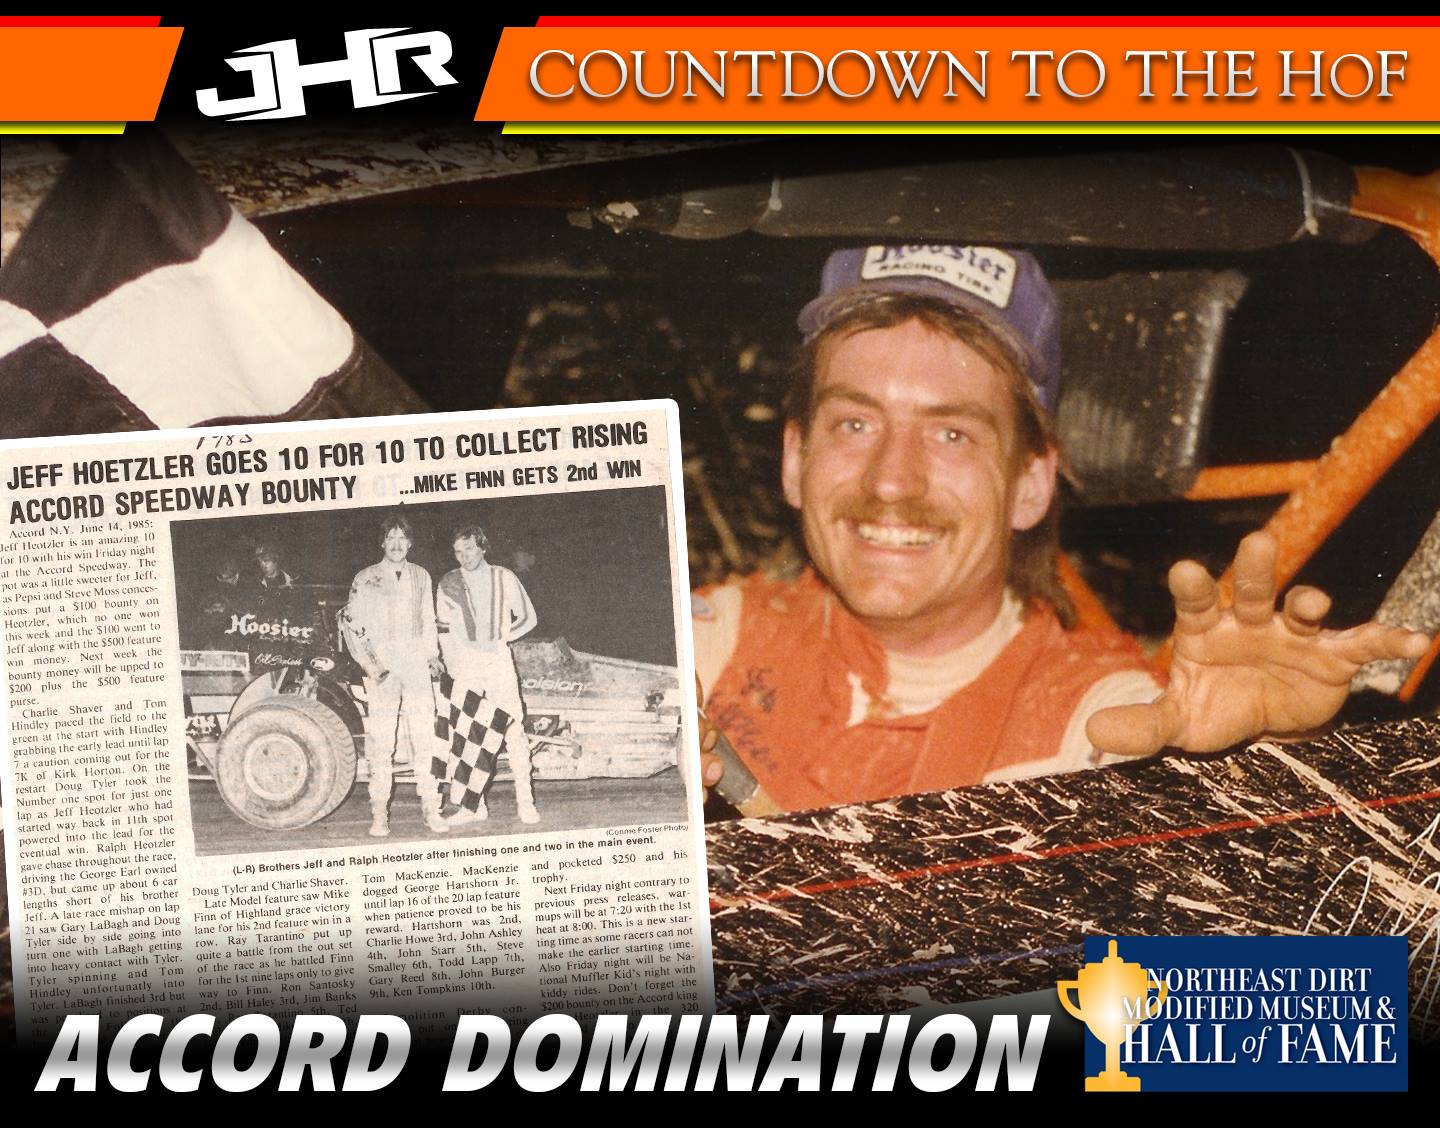 Jeff Heotzler Dirt Modified Hall of Fame - Accord Speedway Dominance 1983-1986